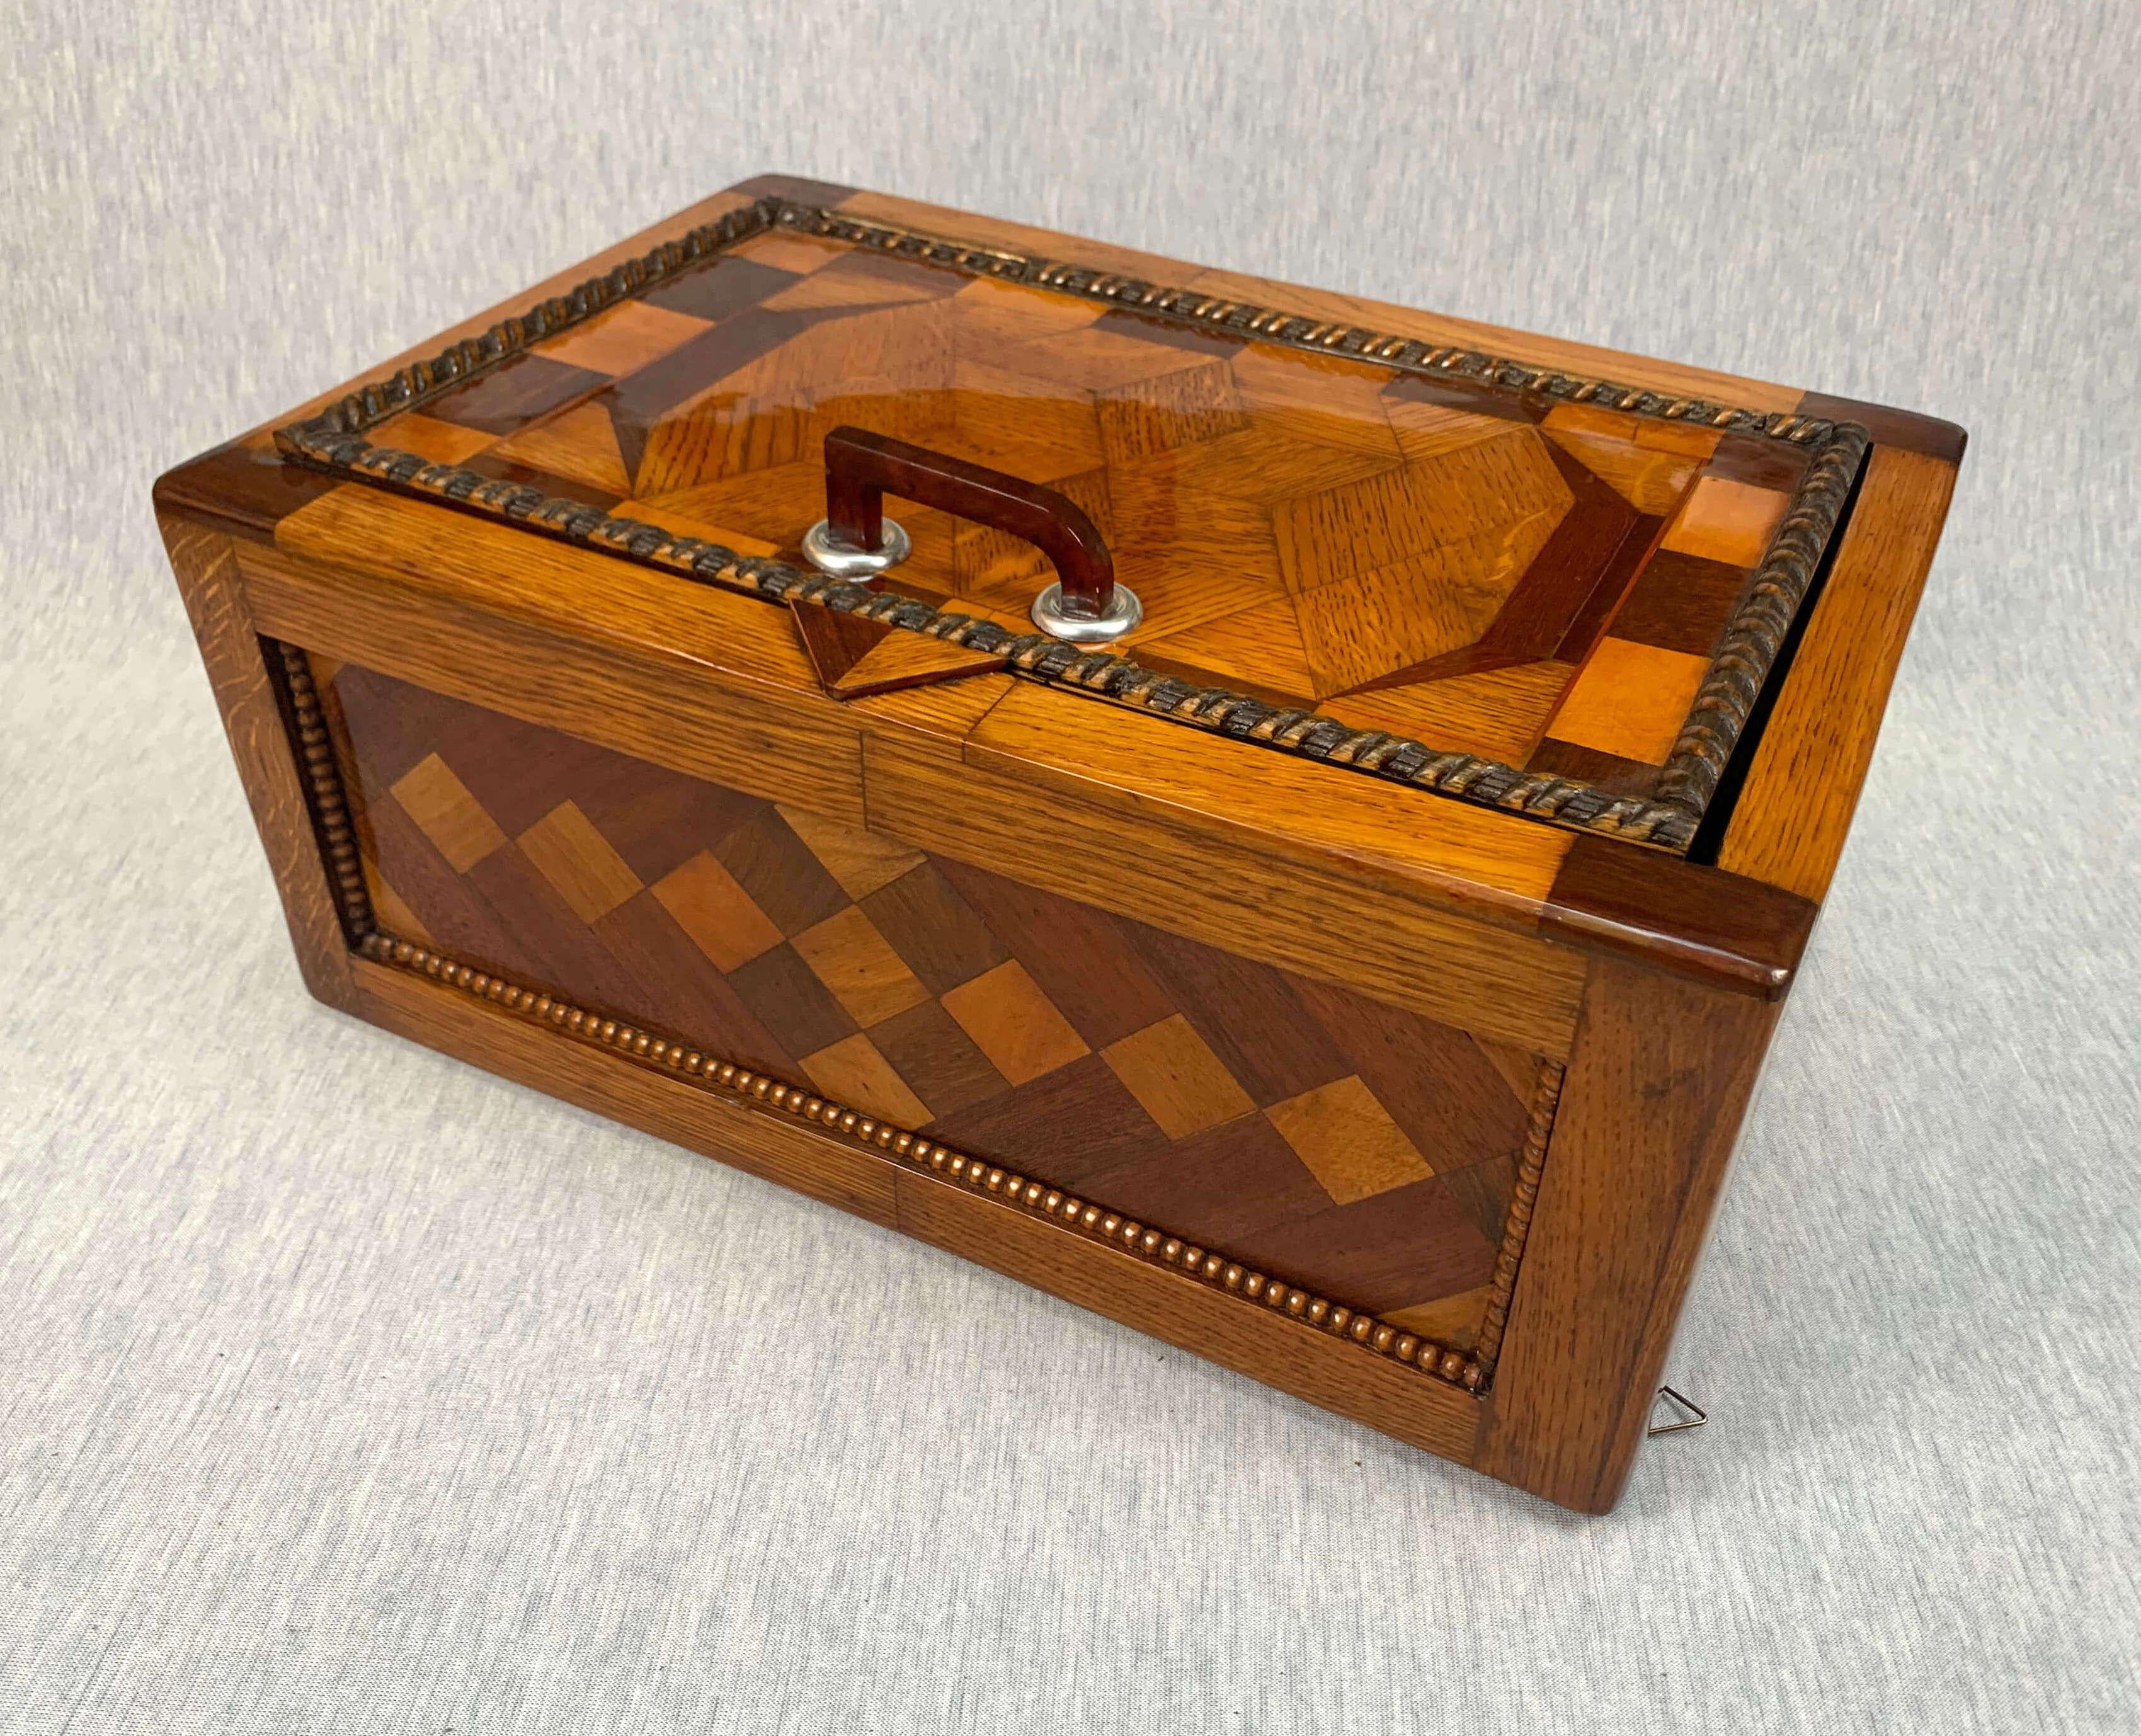 Large historicism box, different hardwoods, South Germany, circa 1860-1880.

Unusual large historicism box / medicine box / hanging cabinet.
Solid oak and cube-shaped veneer with inlays in oak, walnut, rosewood (?) and mahogany.
Lateral: oak,